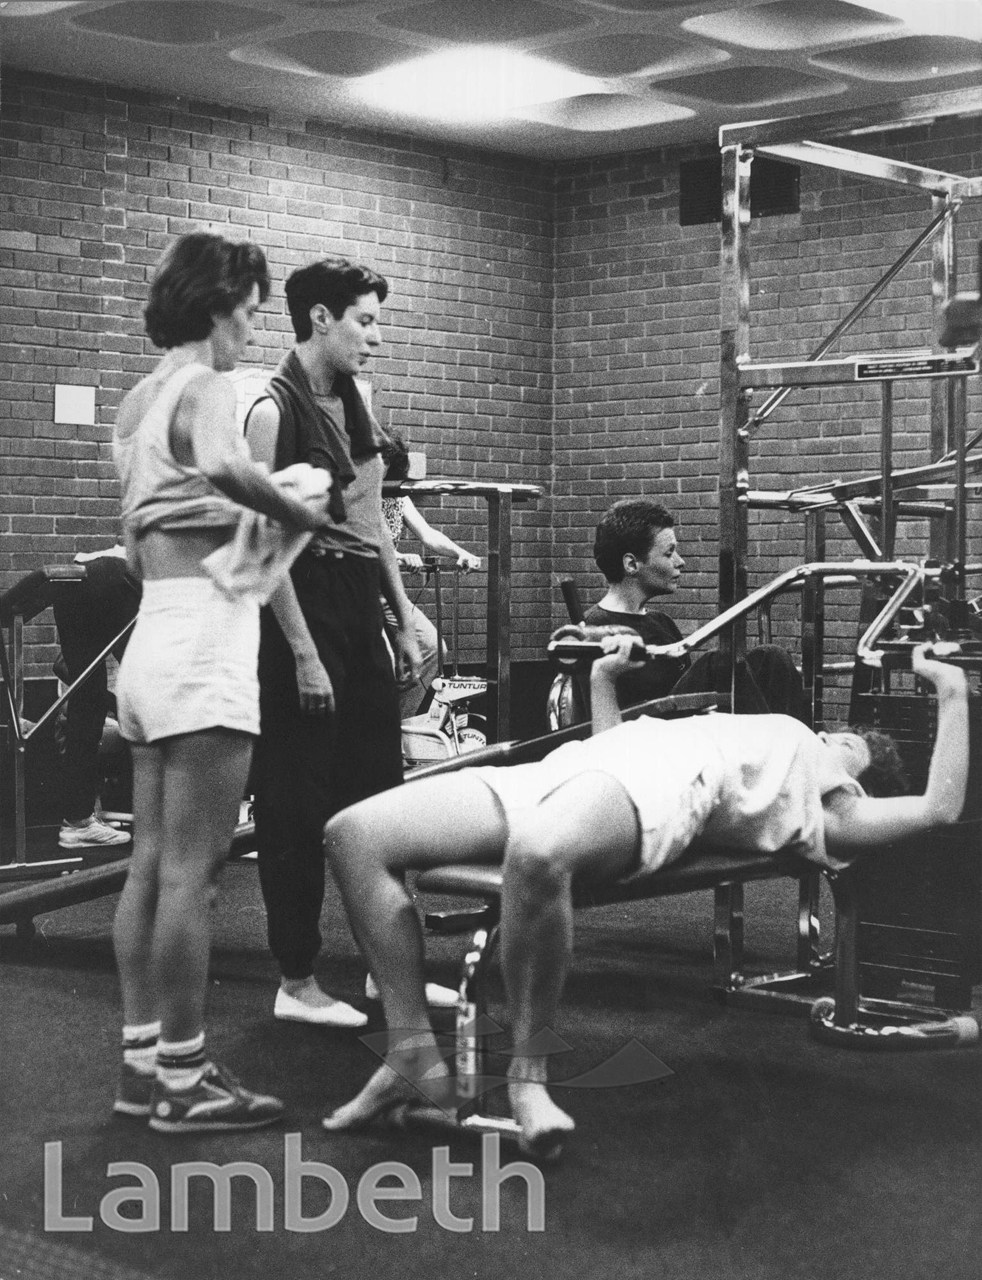 WOMEN’S WEIGHT-LIFTING SESSION, BRISTON RECREATION CENTRE